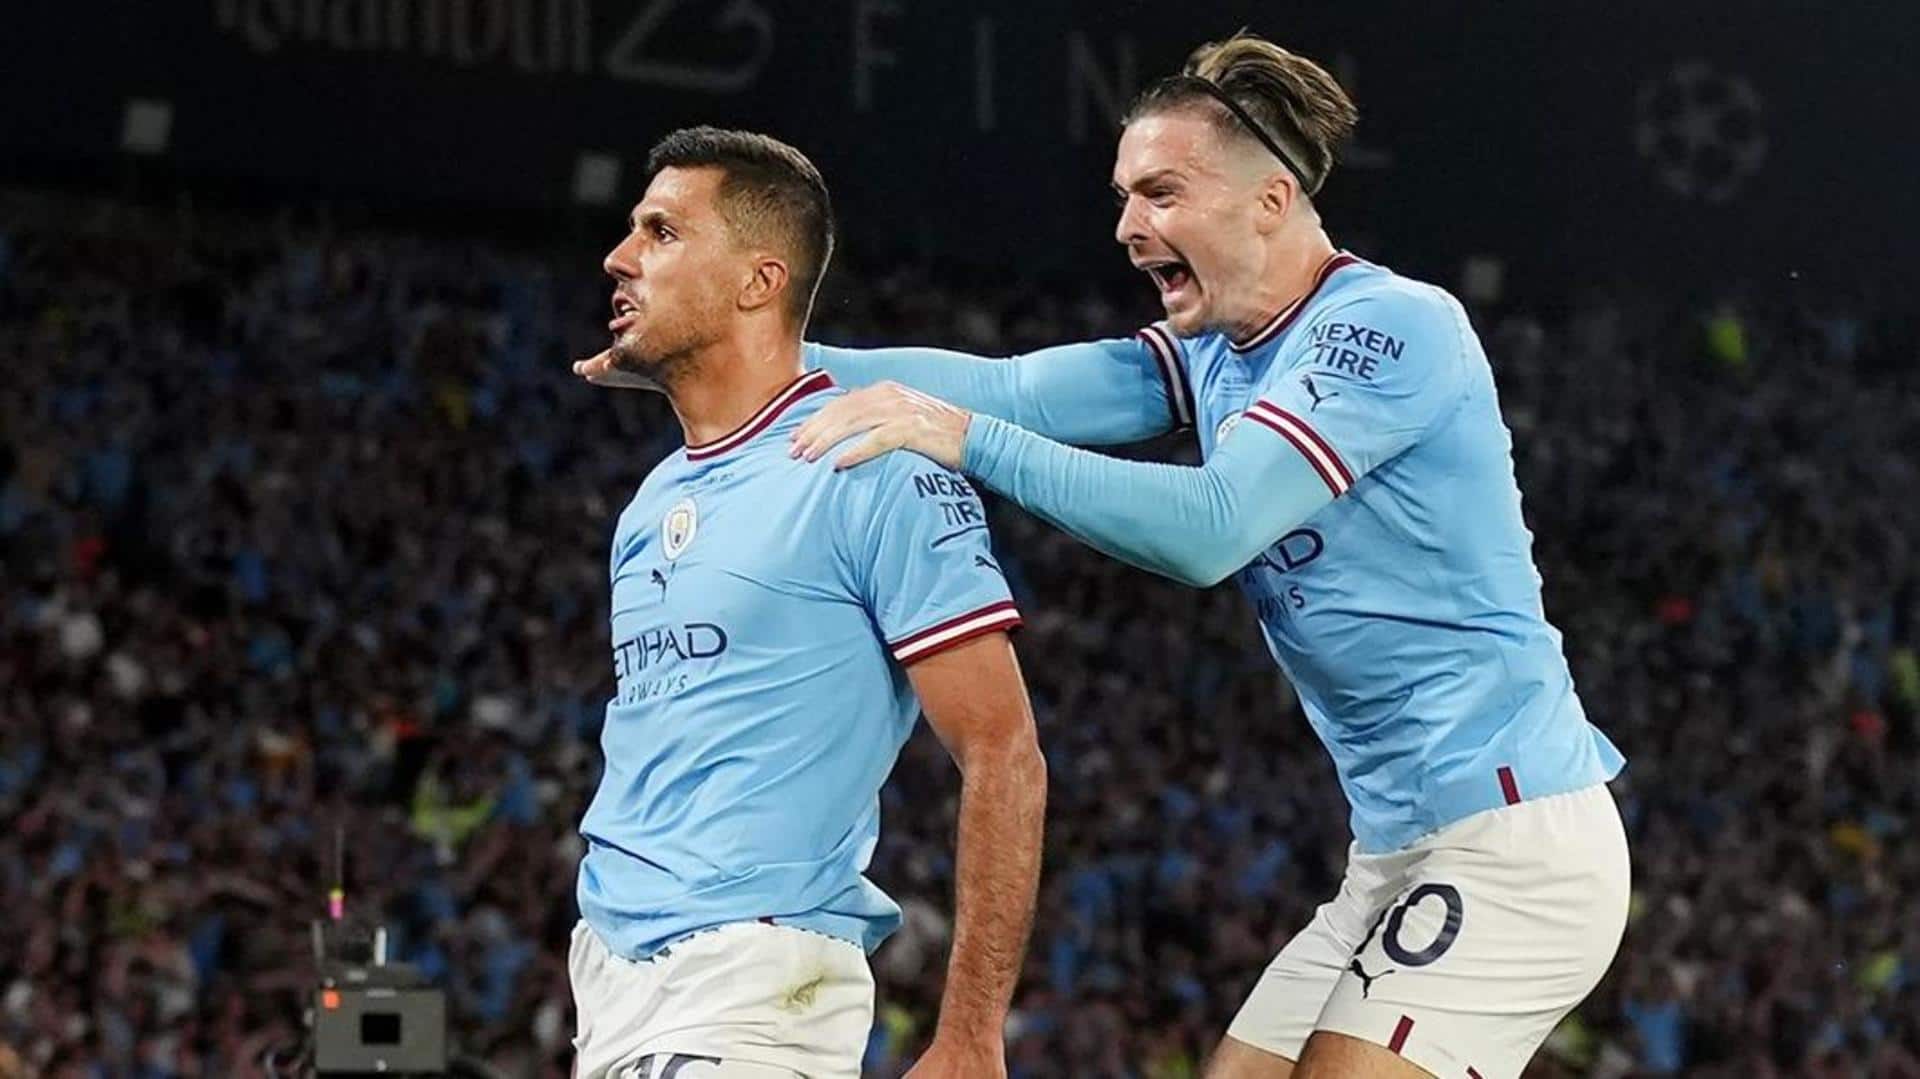 Manchester City claim a historic treble with Champions League win